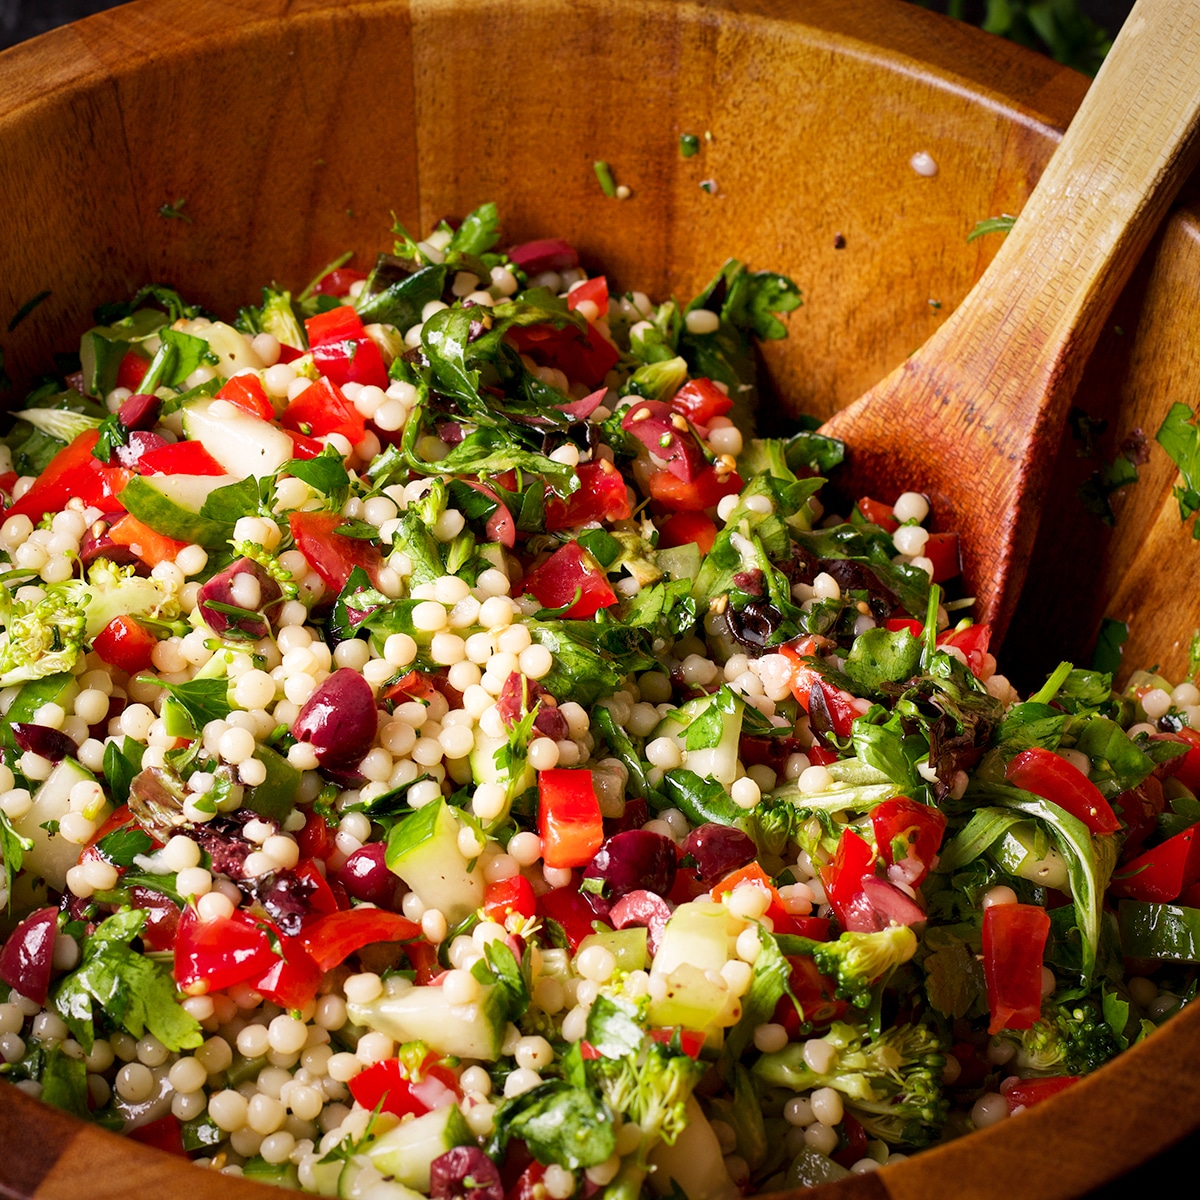 Using a wooden spoon to toss all the ingredients together for Vegan Pearl Couscous Salad.